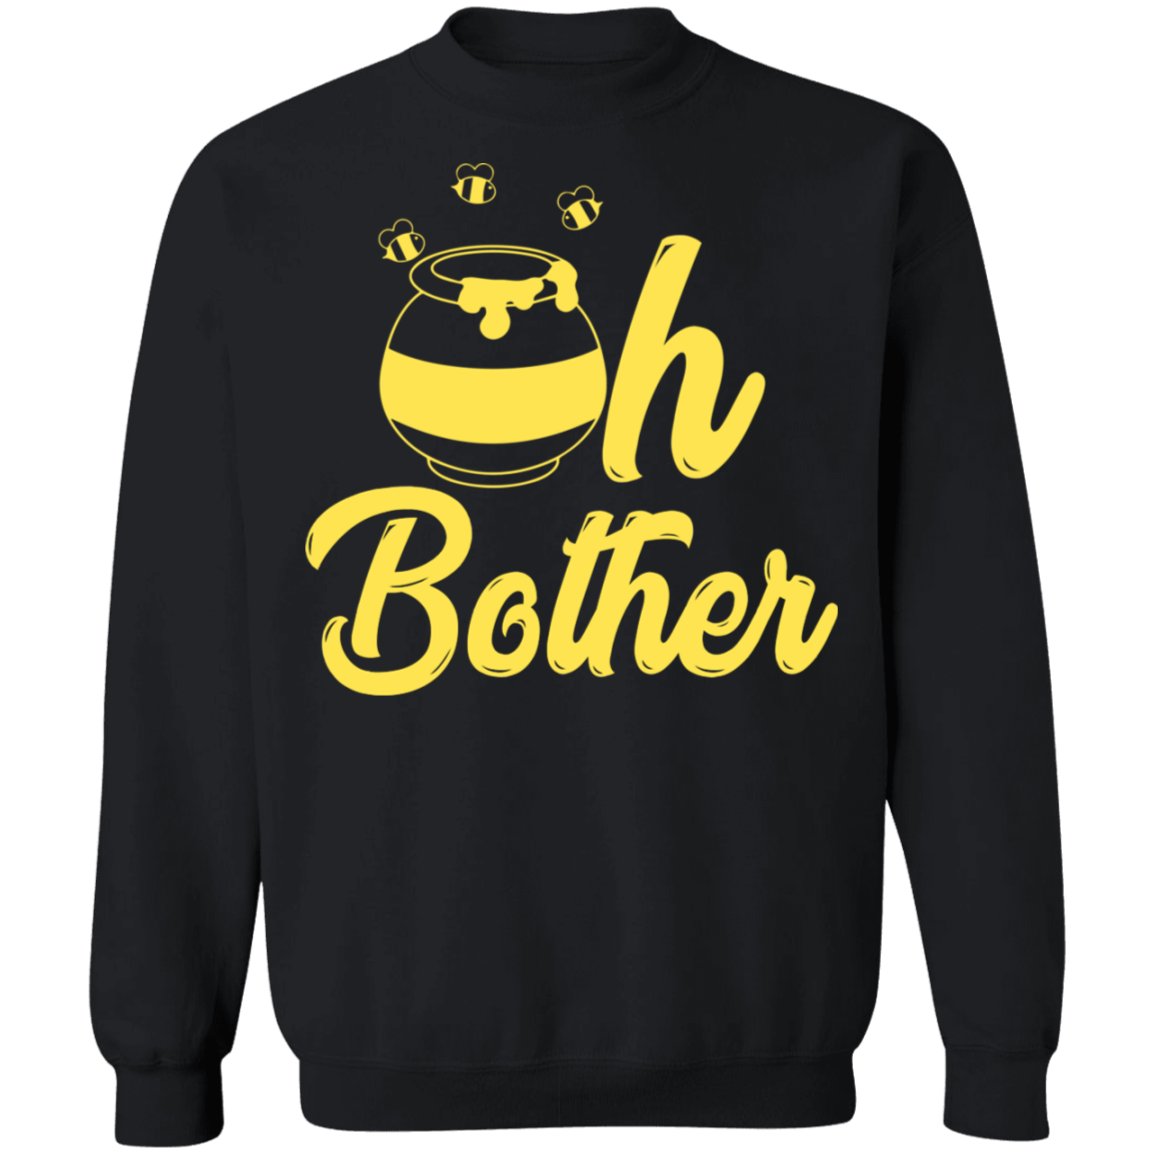 Oh Bother - byPhuc Pullover Sweatshirt - V1